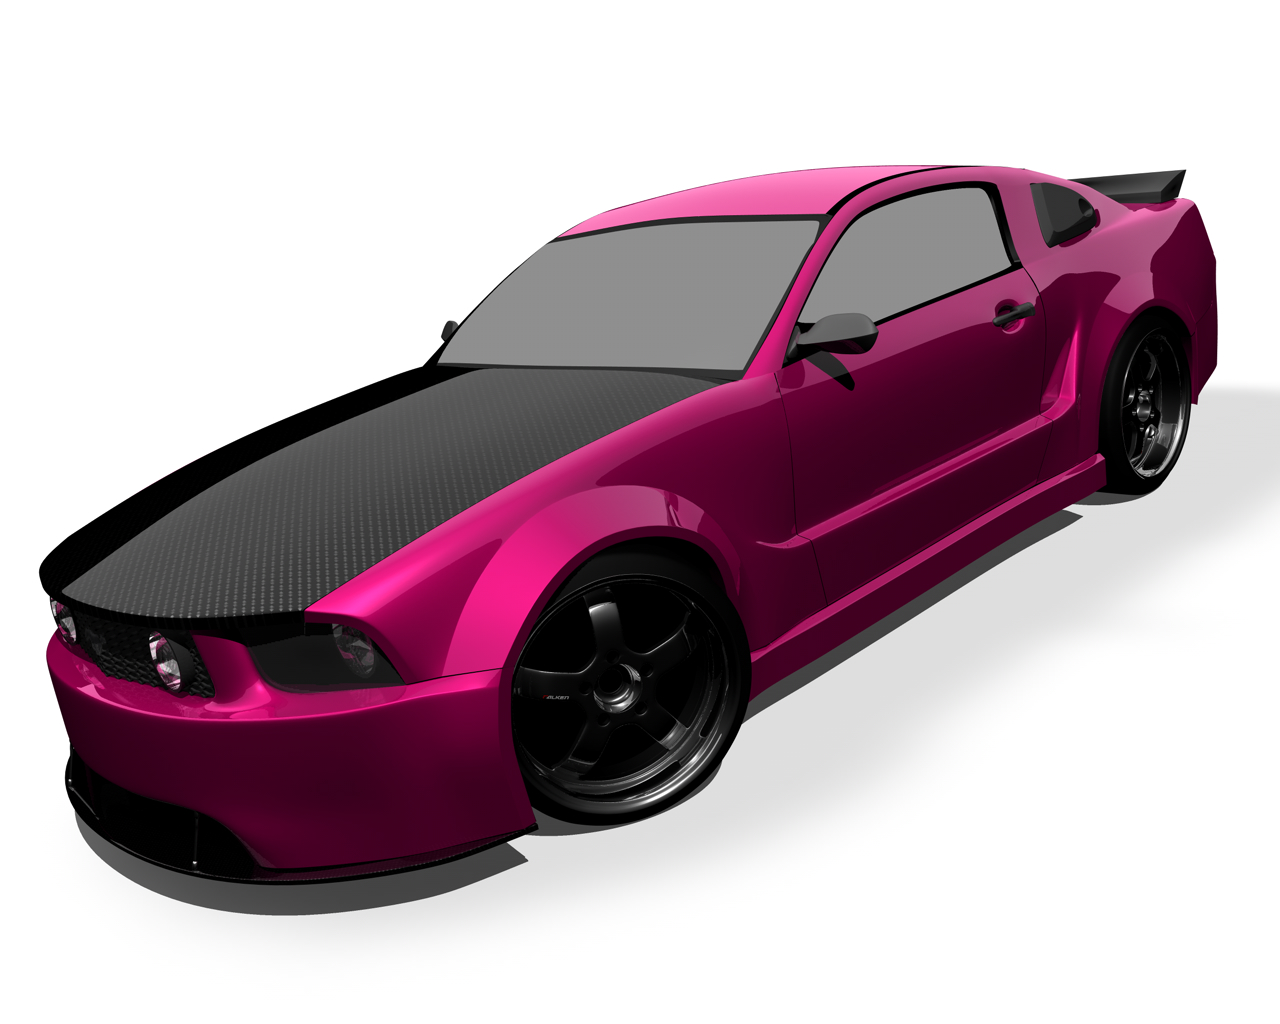 Ford_Mustang_GT_by_grudas.jpg